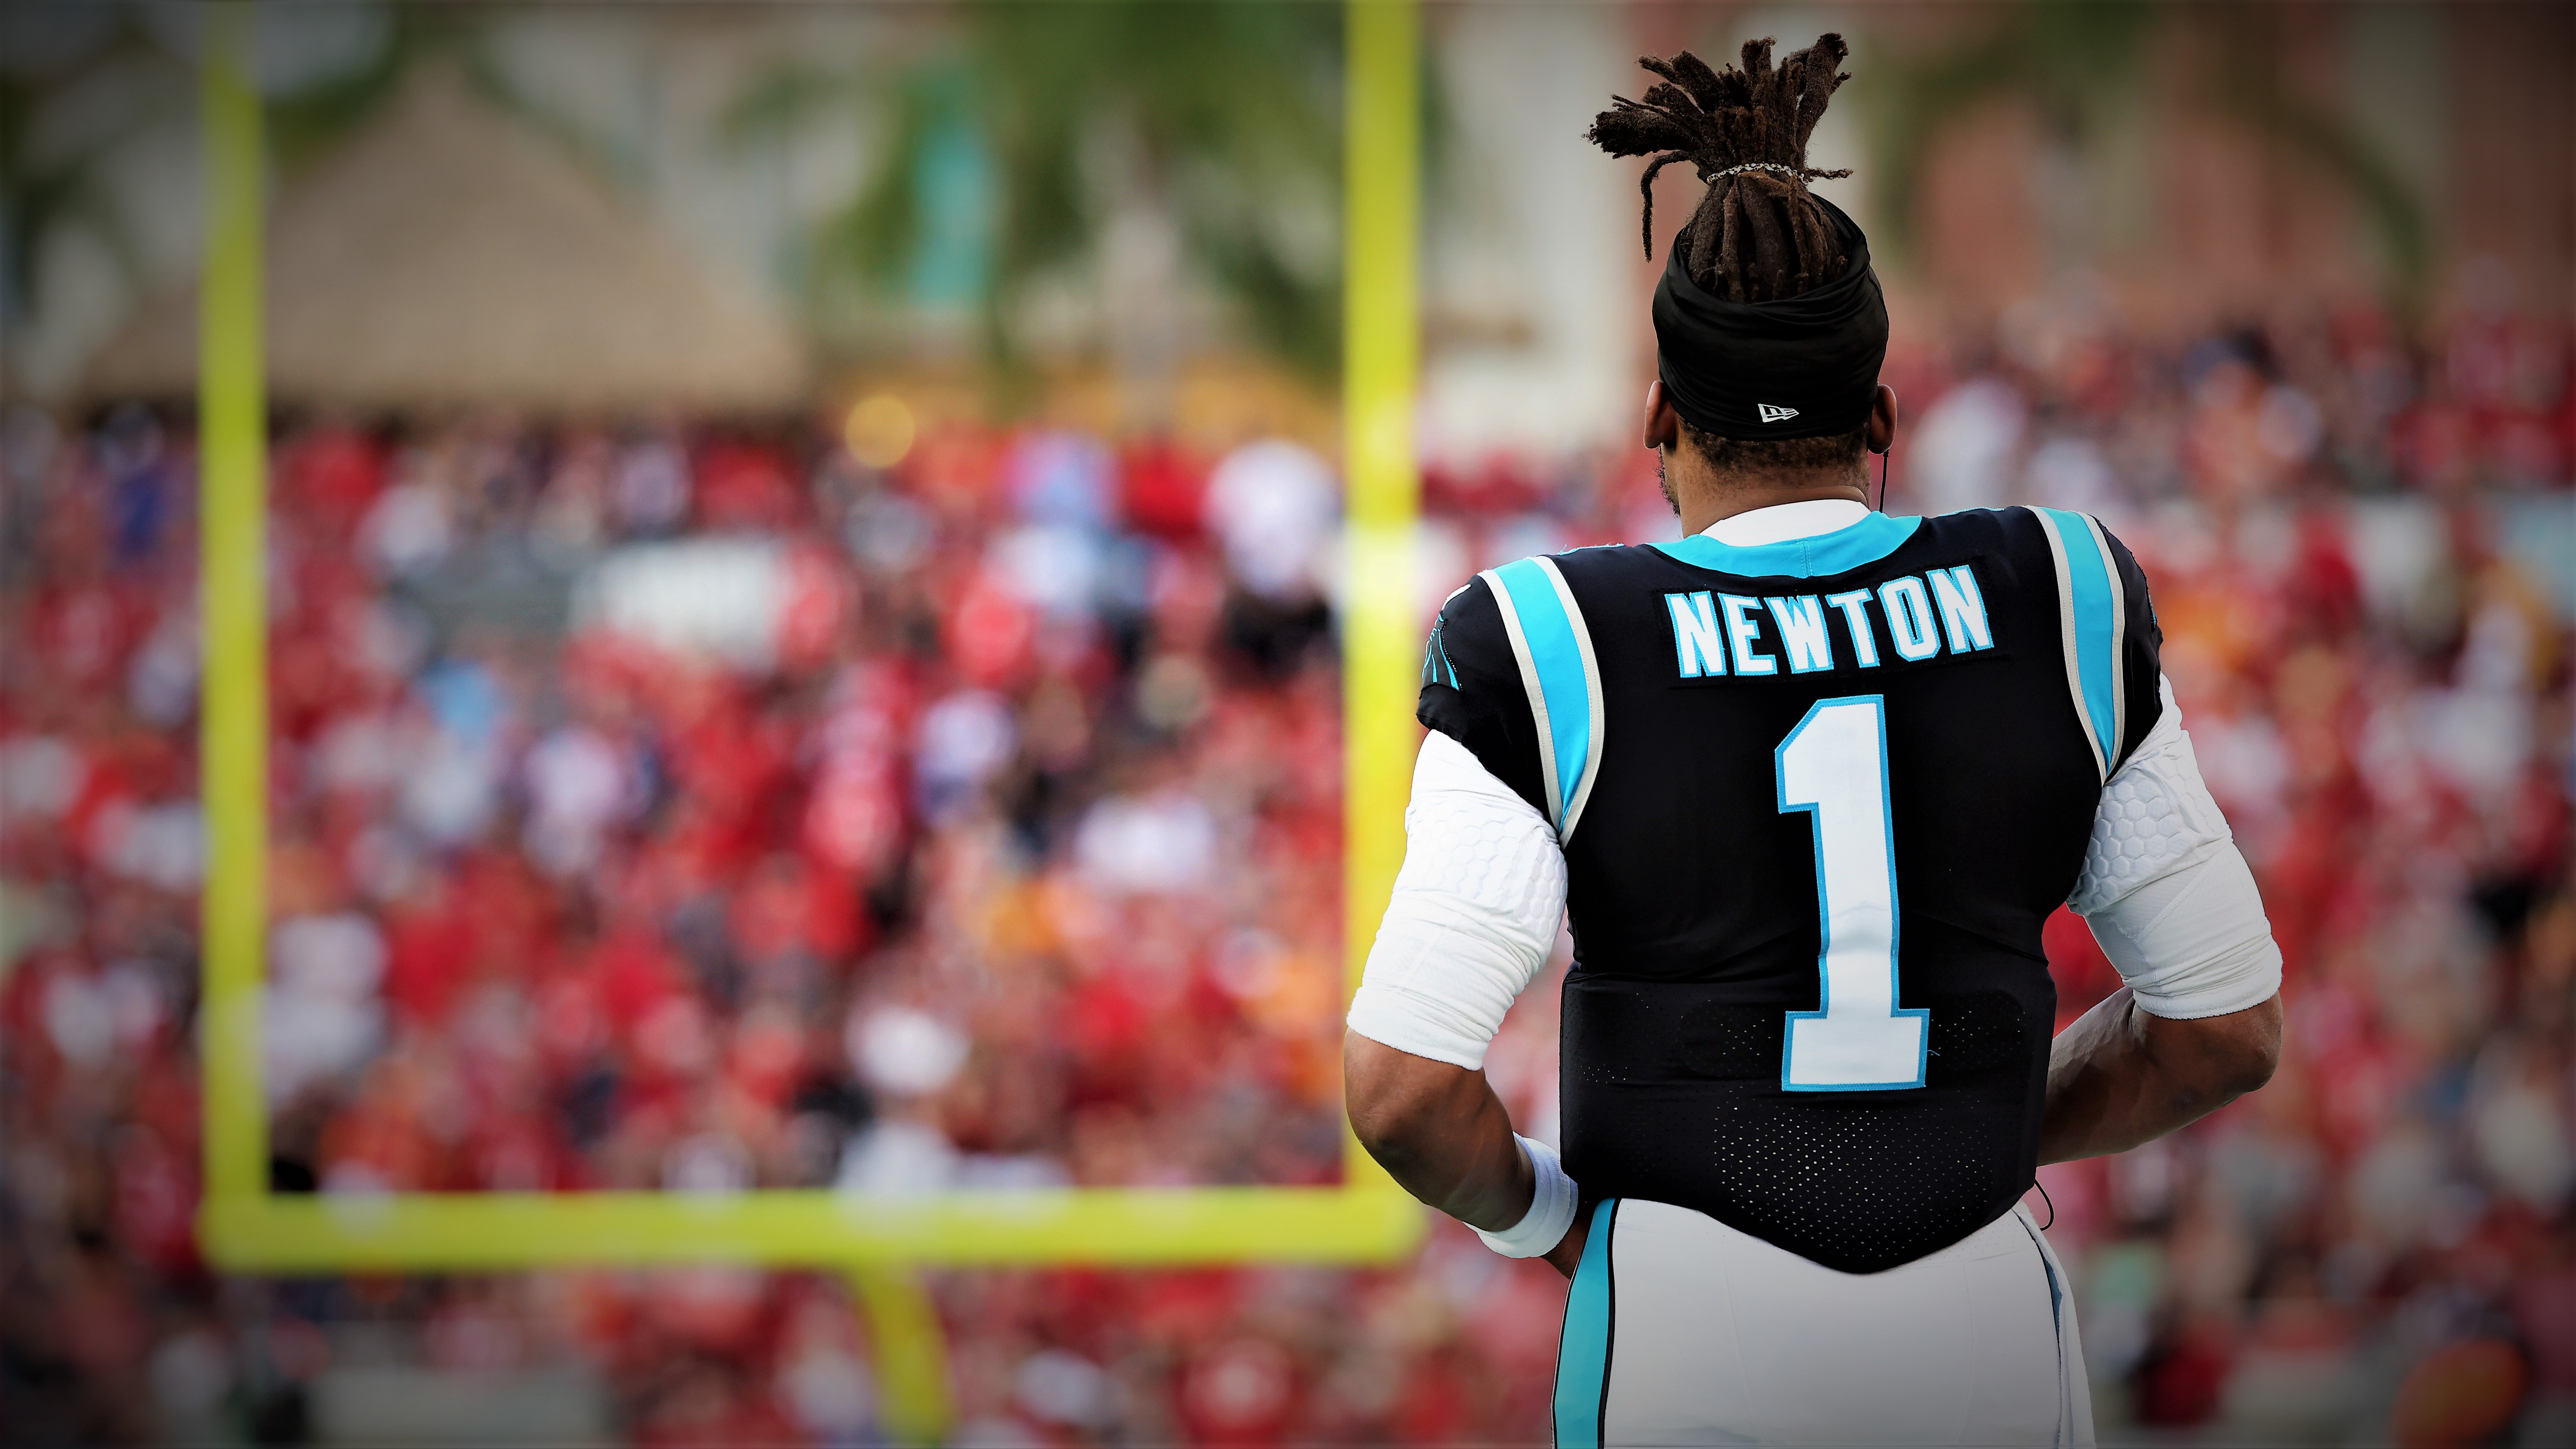 Cam Newton Wants To Stay In NFL, But ‘I’m Not Coming Back For No 5-12 [Season]’ – CBS Boston